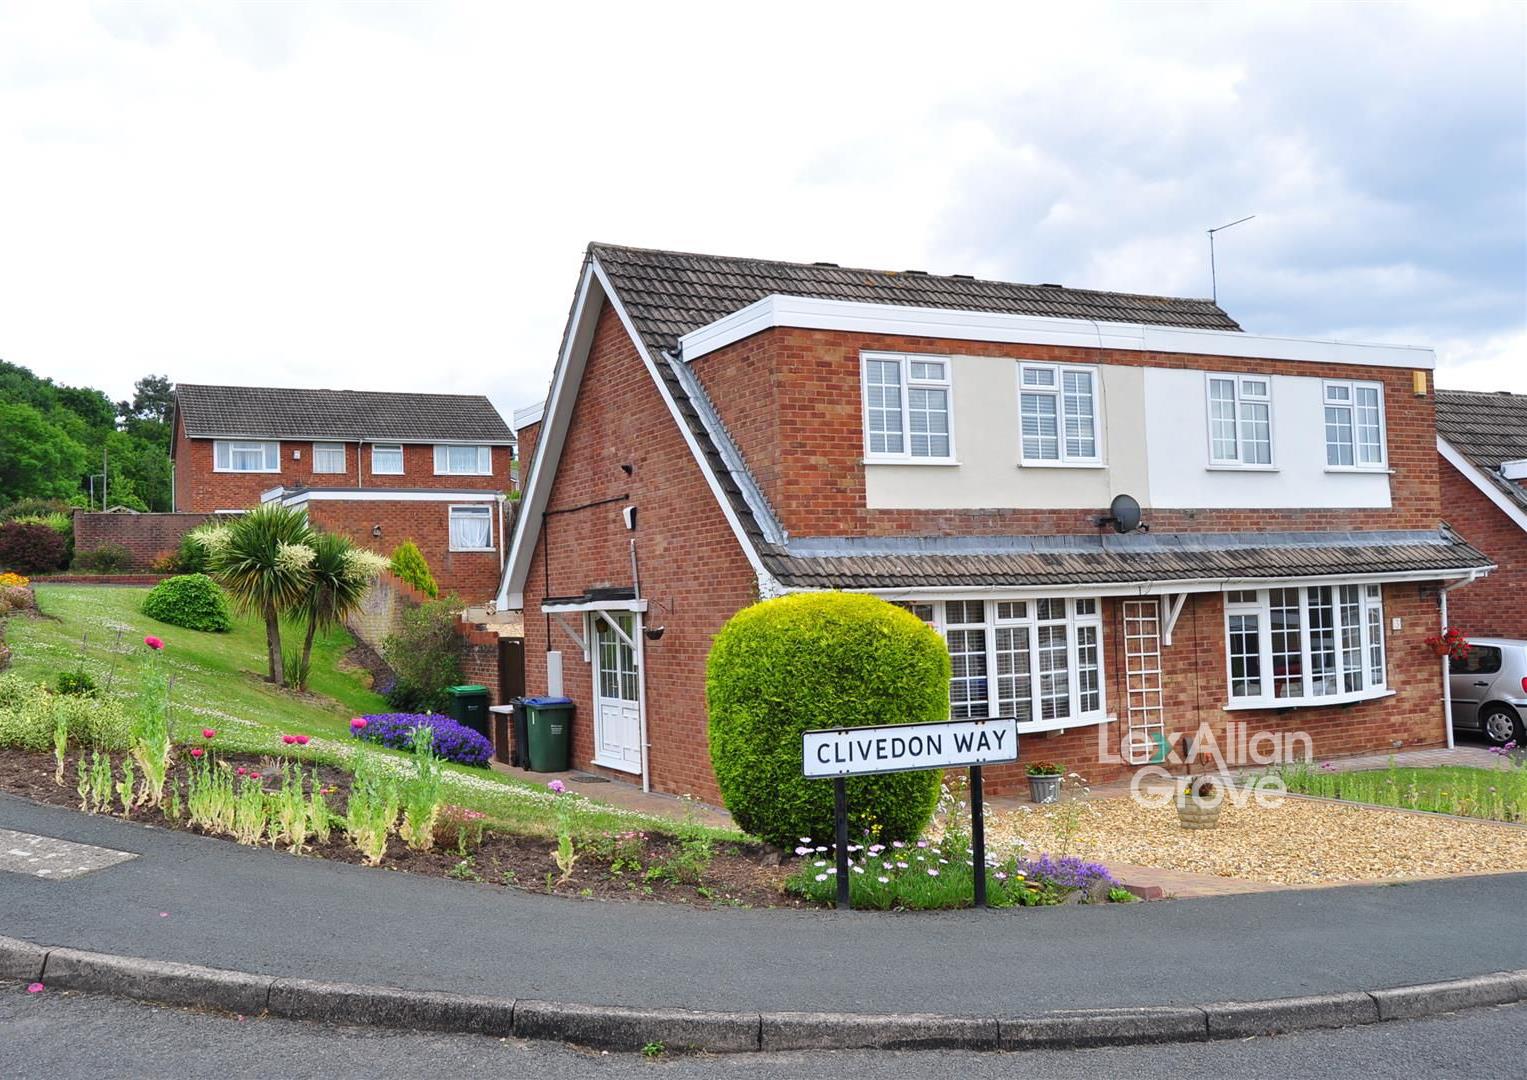 2 bed semi-detached house for sale in Clivedon Way, Halesowen - Property Image 1